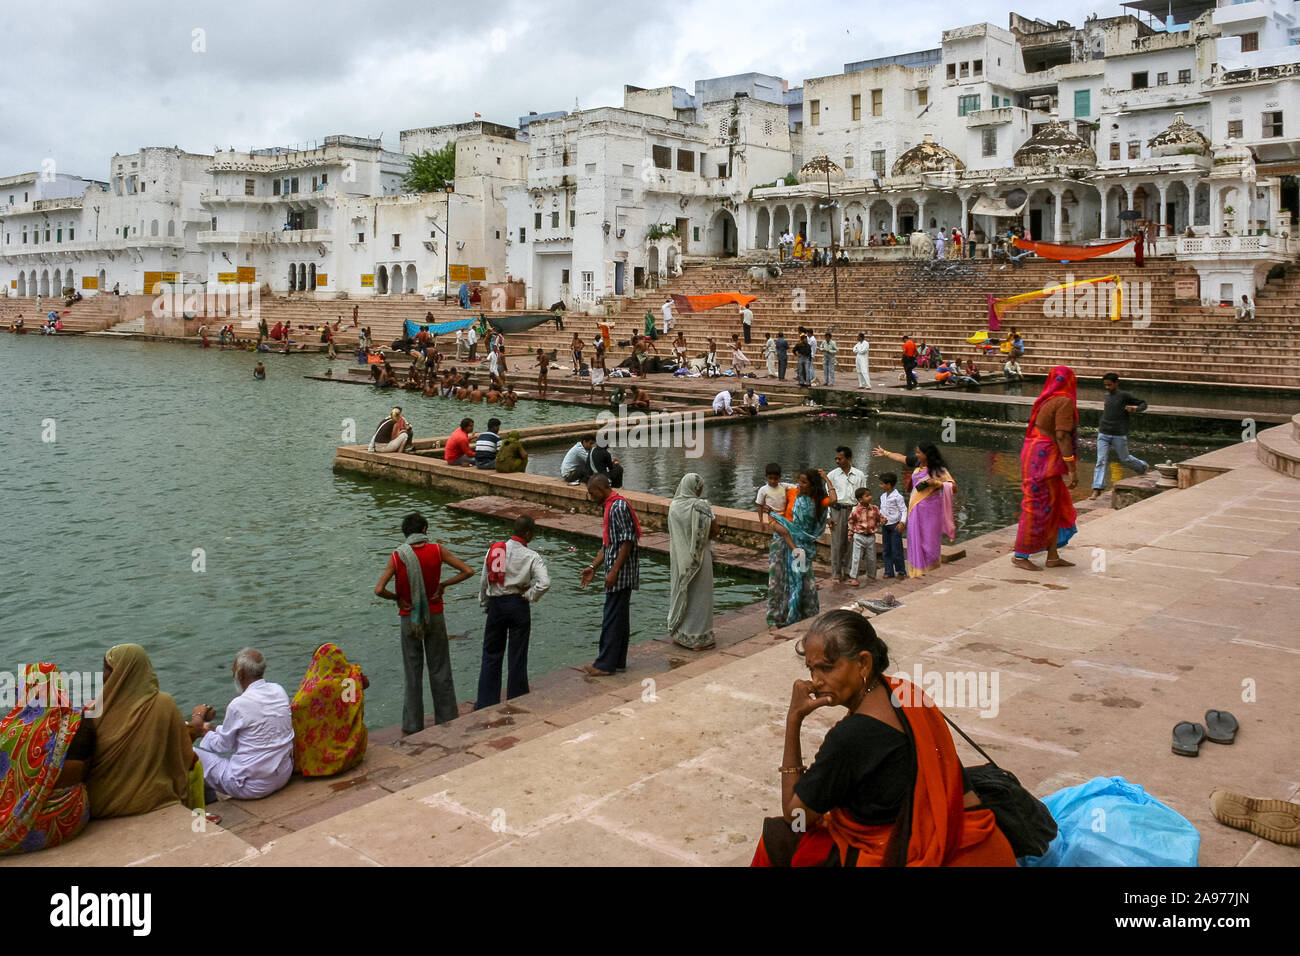 Pushkar, Rajasthan, India:  Indian people sit or walk  on the shores (ghat) of the holy Pushkar lake while some women blow wet saris in the wind. Stock Photo